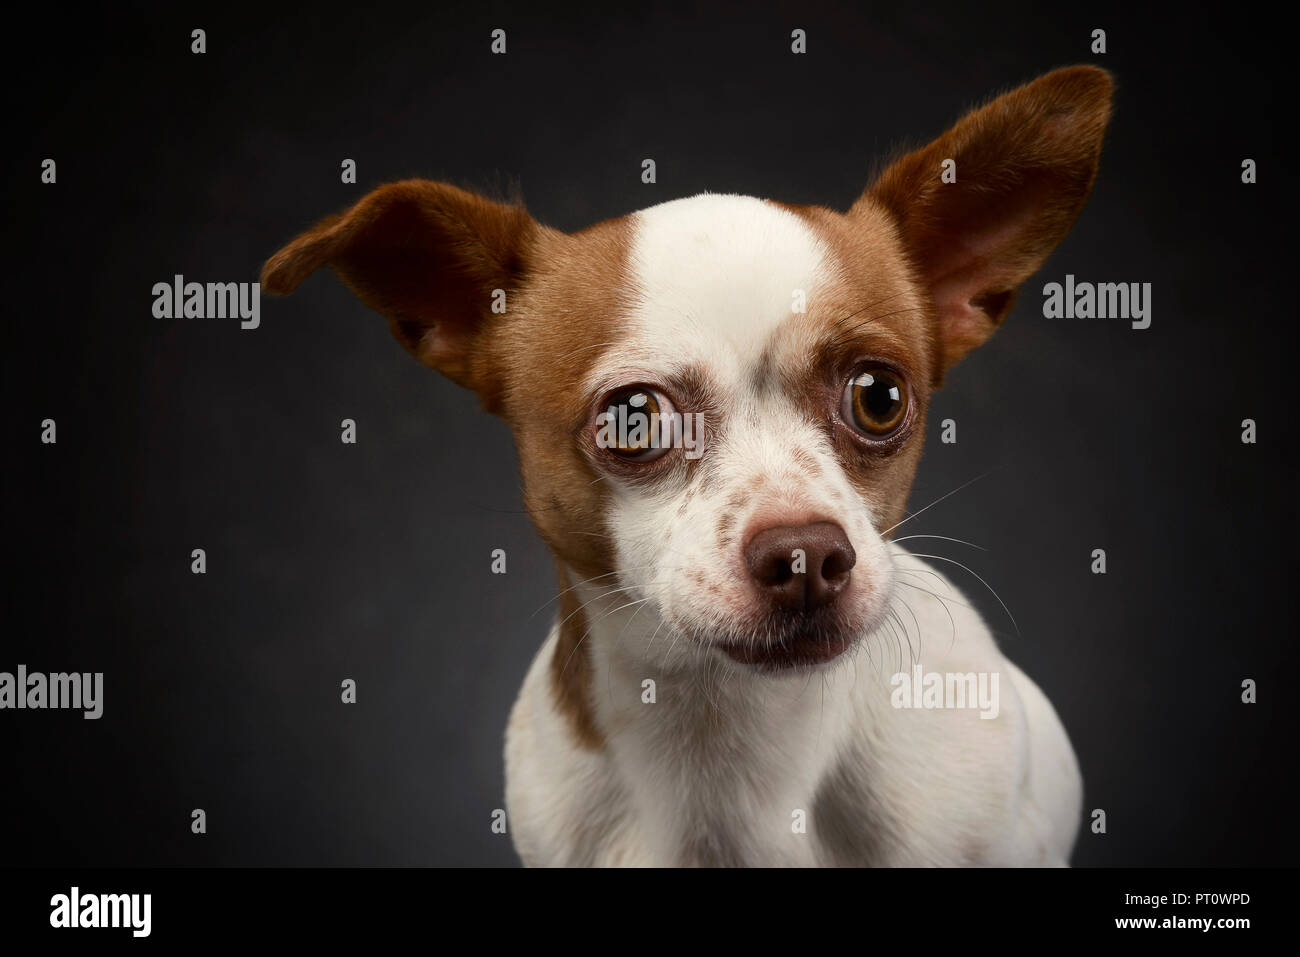 Ugly Flying Ears Chihuahua Portrait In A Gray Background Stock Photo Alamy